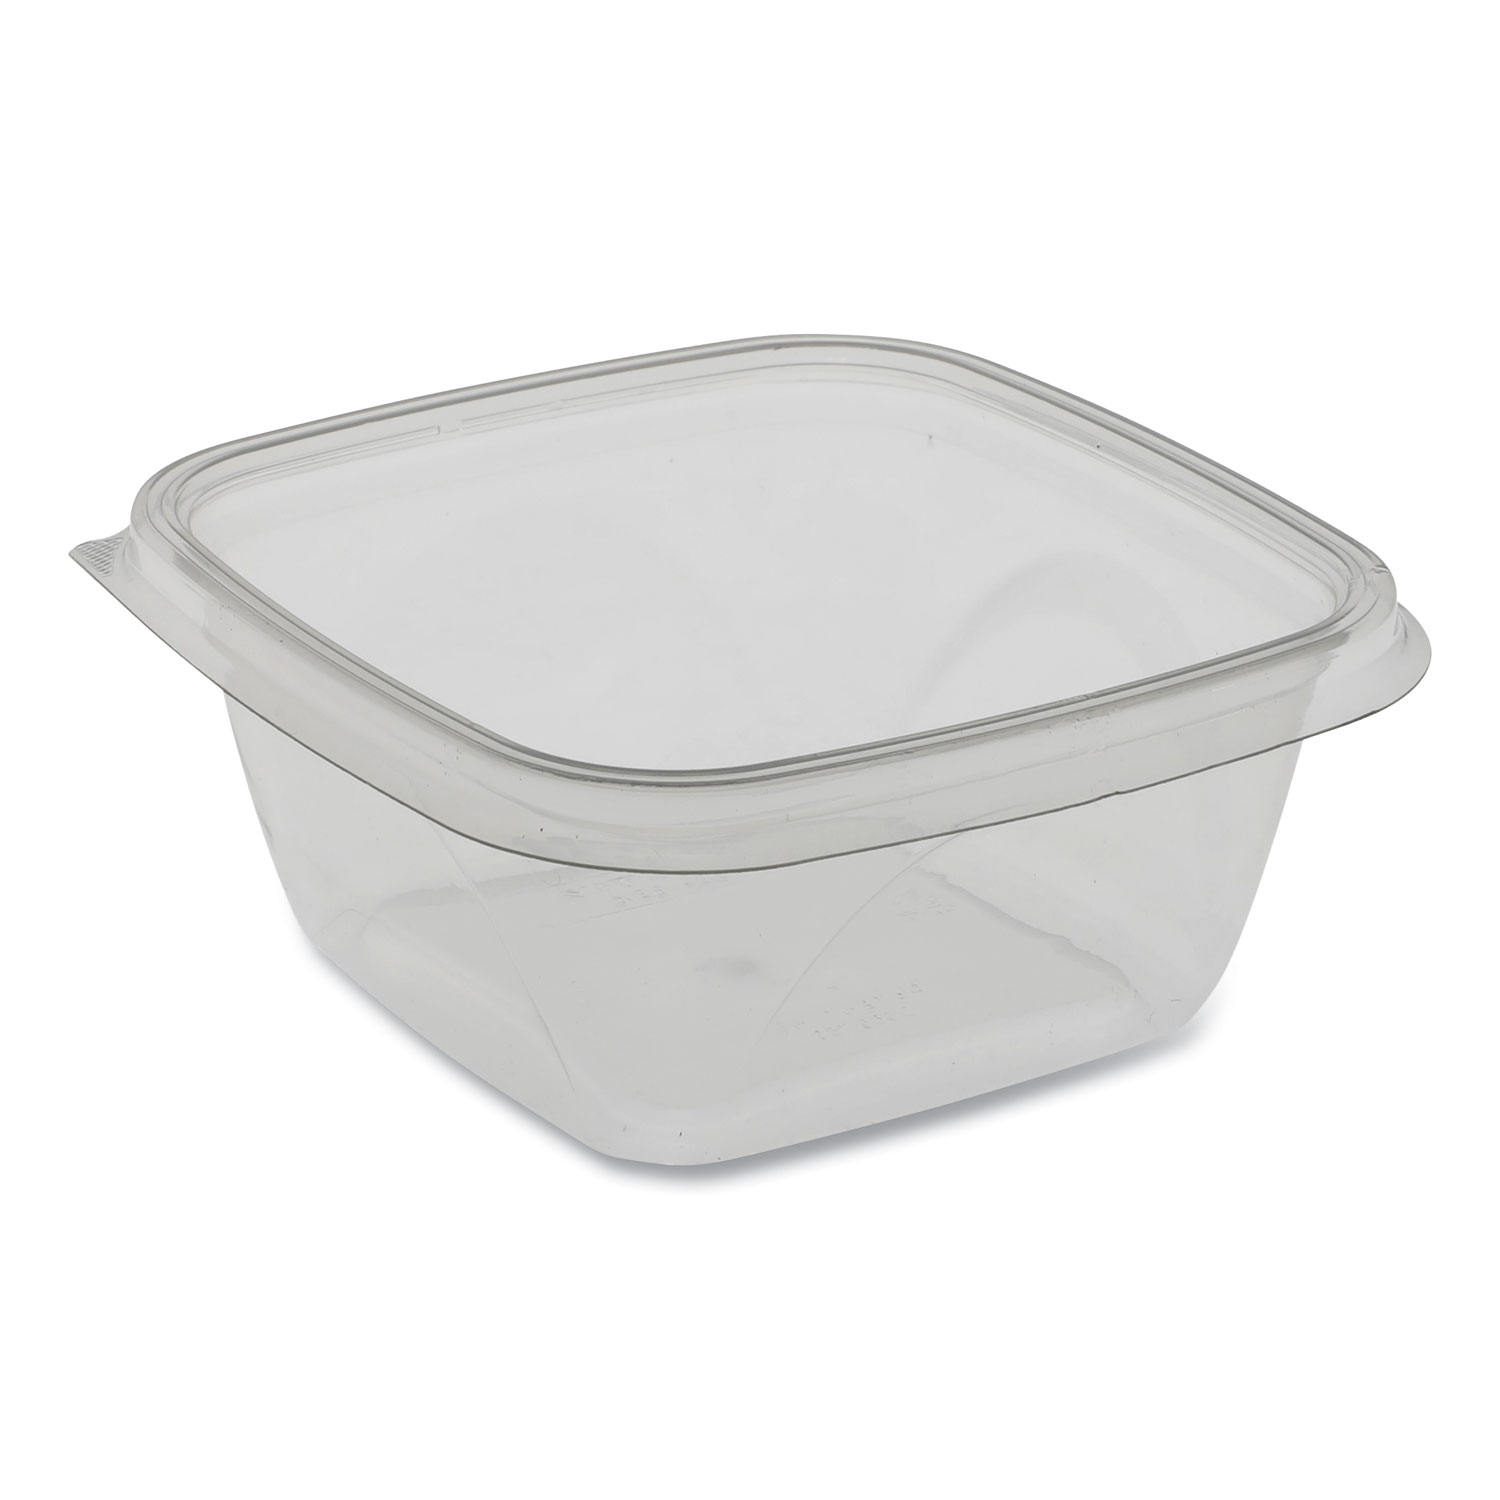 Pactiv EarthChoice Recycled PET Square Base Salad Containers, 5 x 5 x 1.75, 16 oz, Clear, 504/Carton